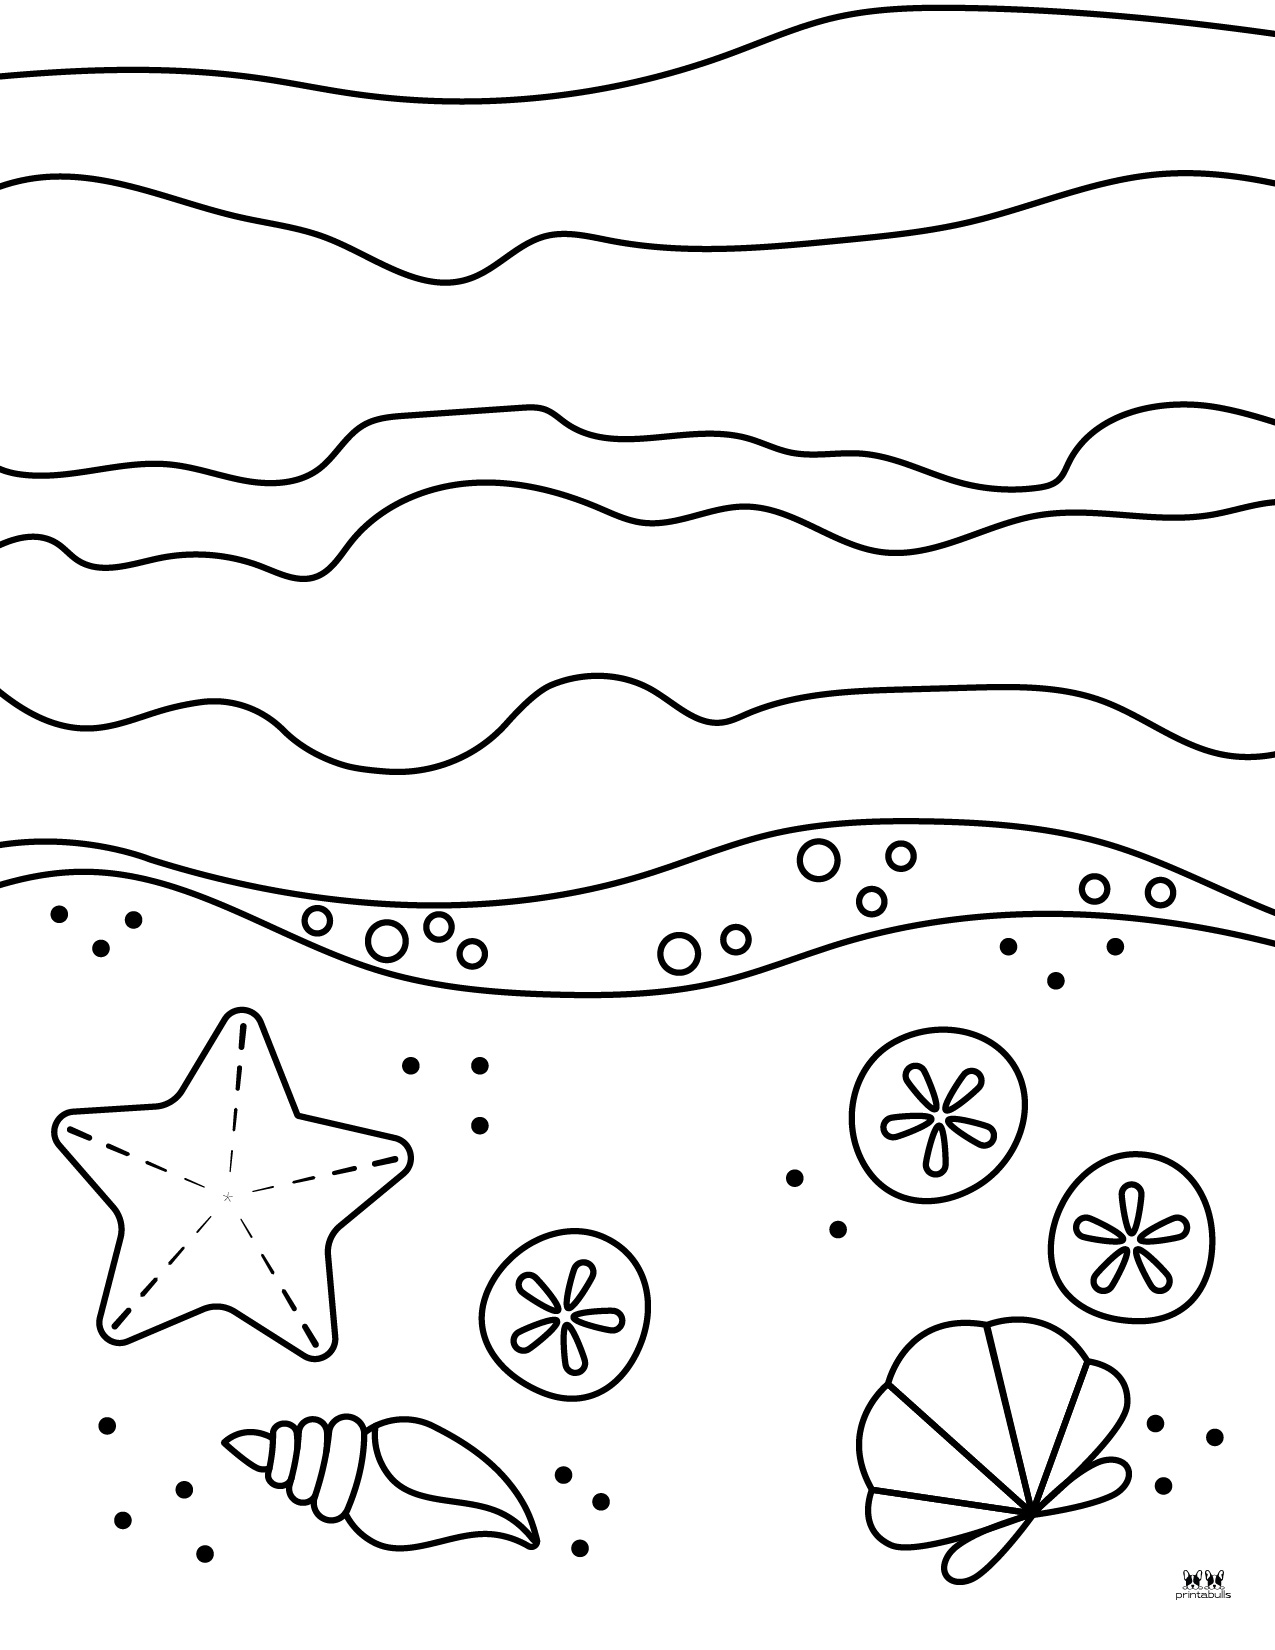 beach-coloring-pages-25-free-pages-printabulls